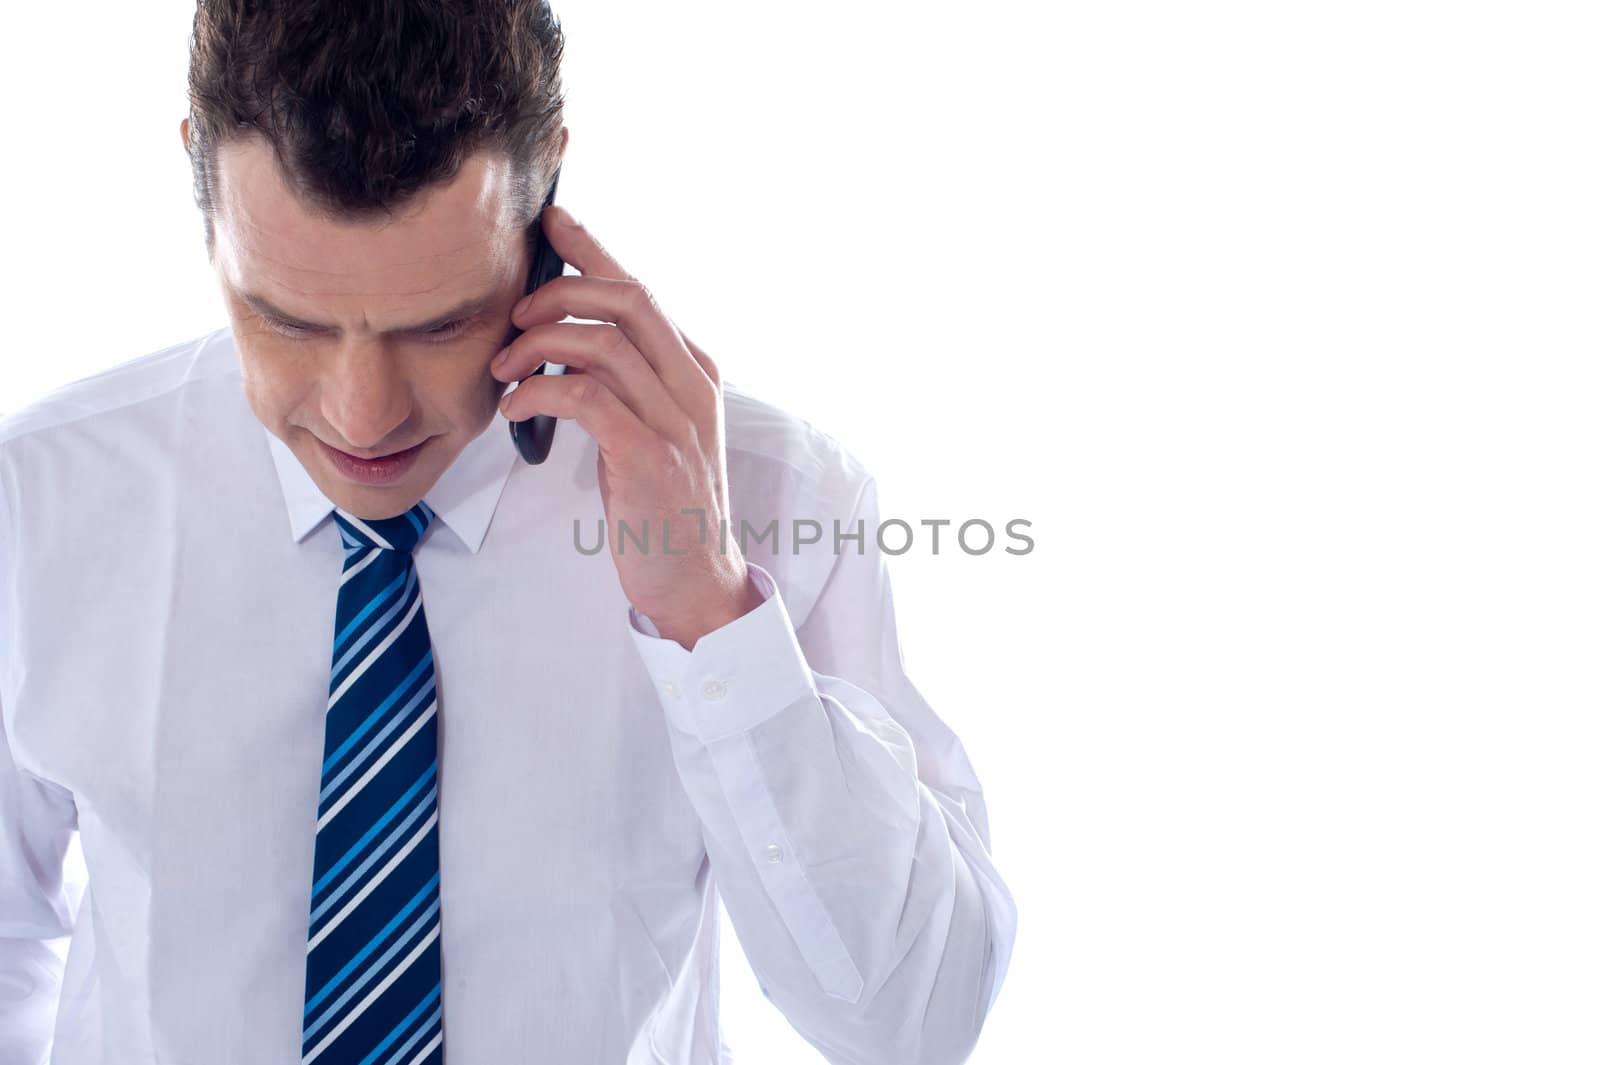 Business professional communicating on phone against white background